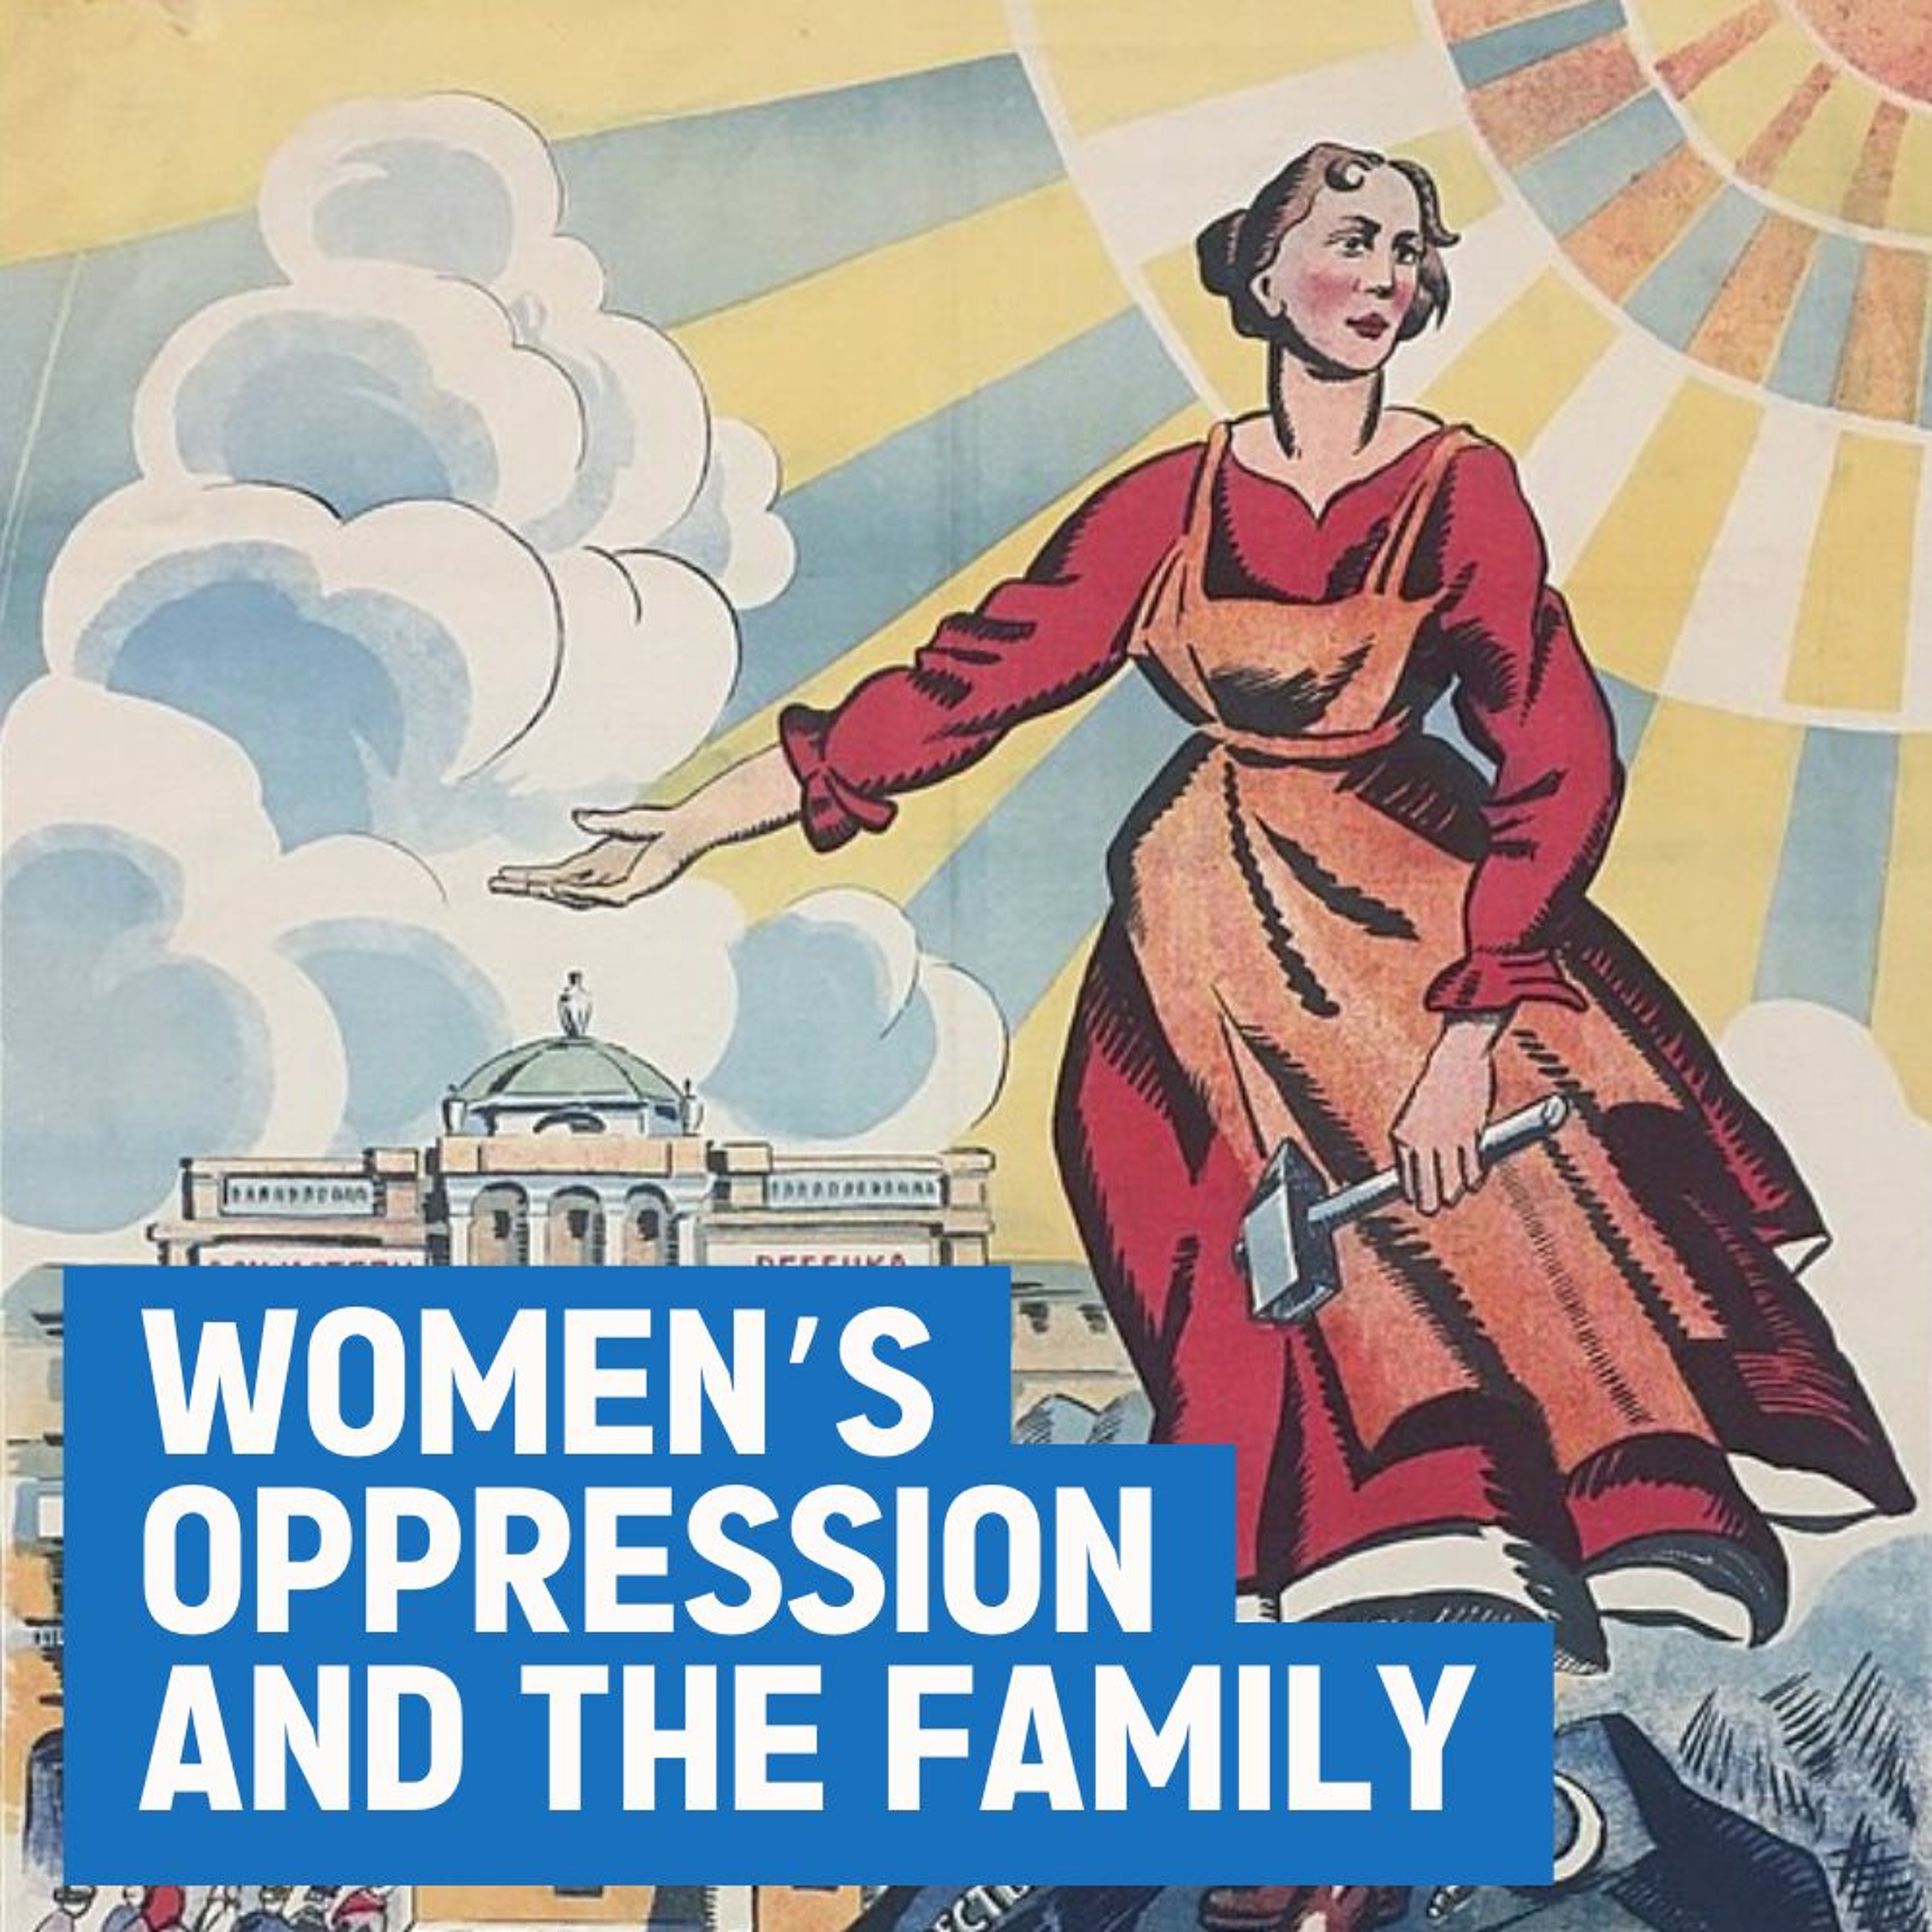 Women's oppression and the family